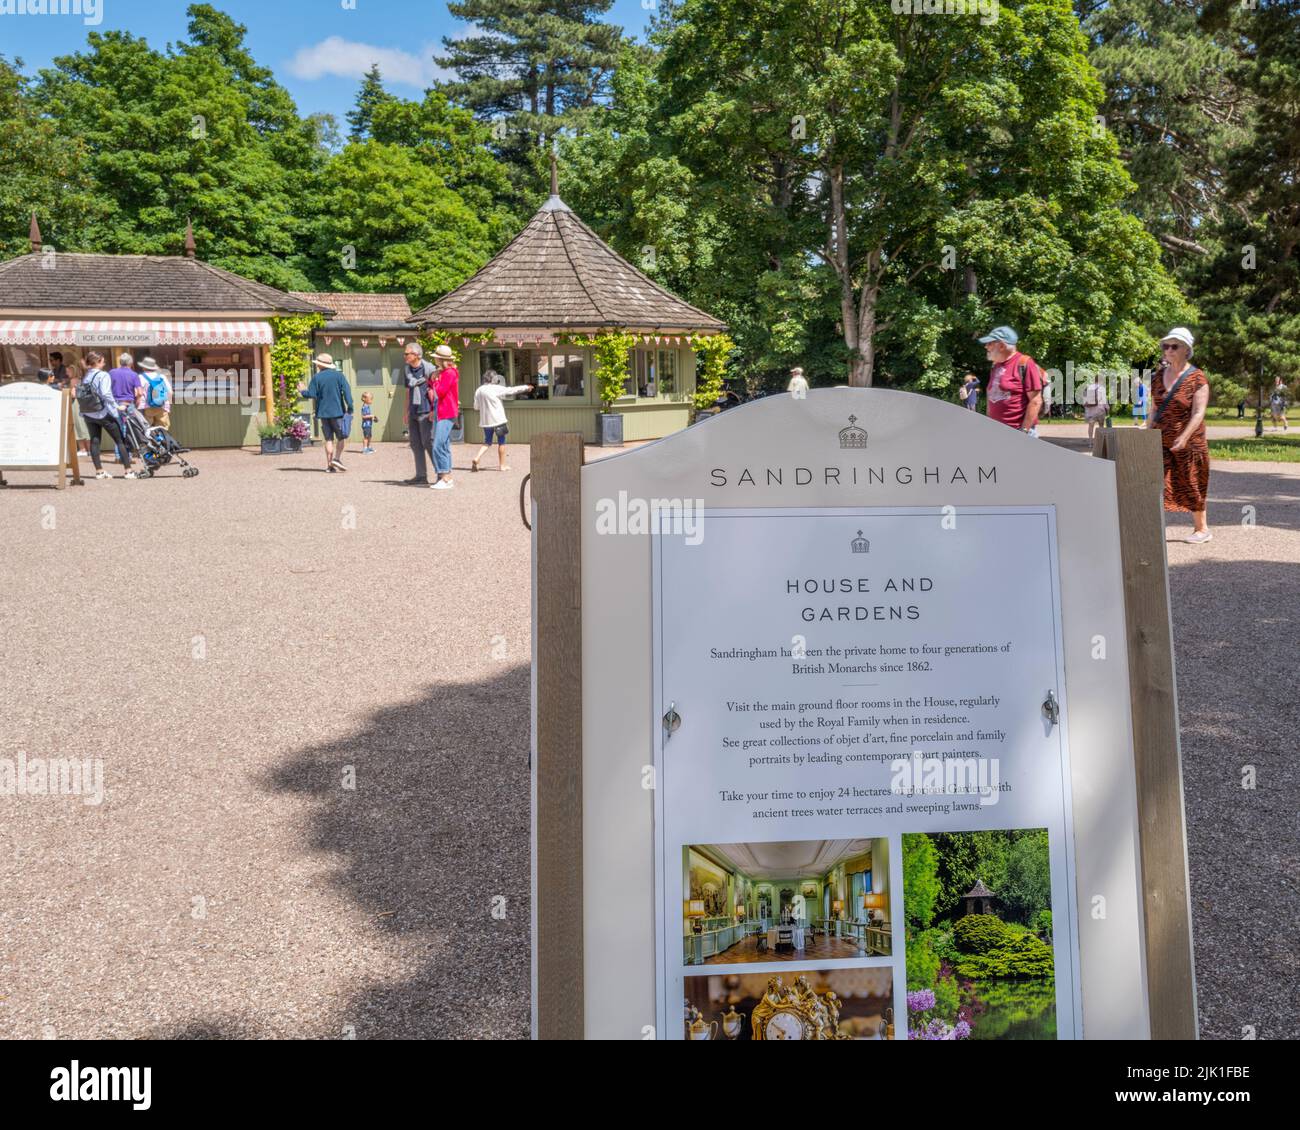 The ticket, shops and cafe area at Sandringham House. Stock Photo